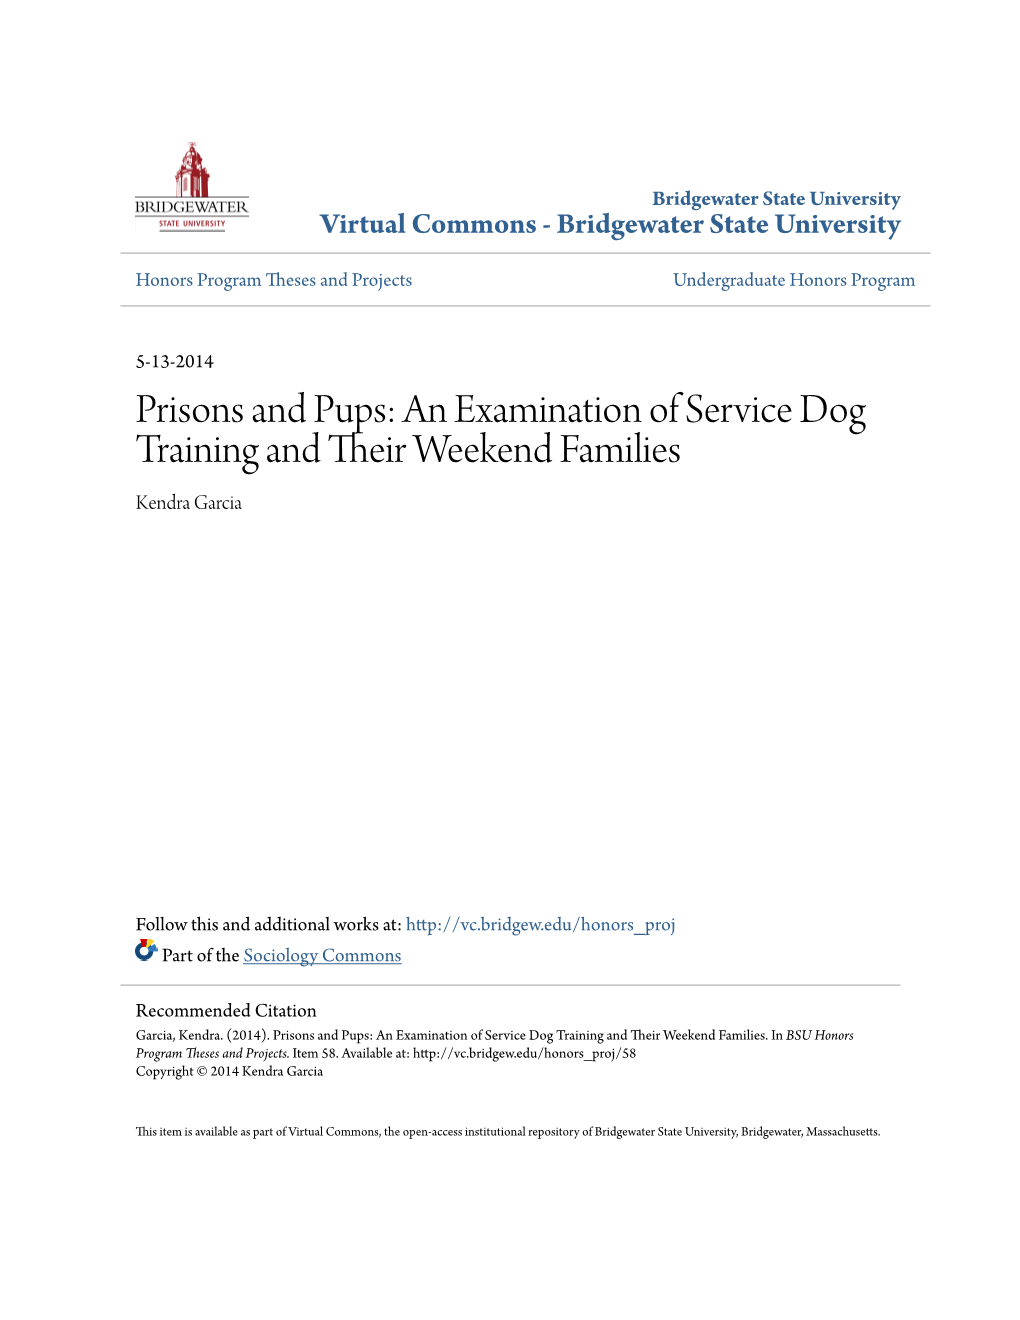 Prisons and Pups: an Examination of Service Dog Training and Their Weekend Families